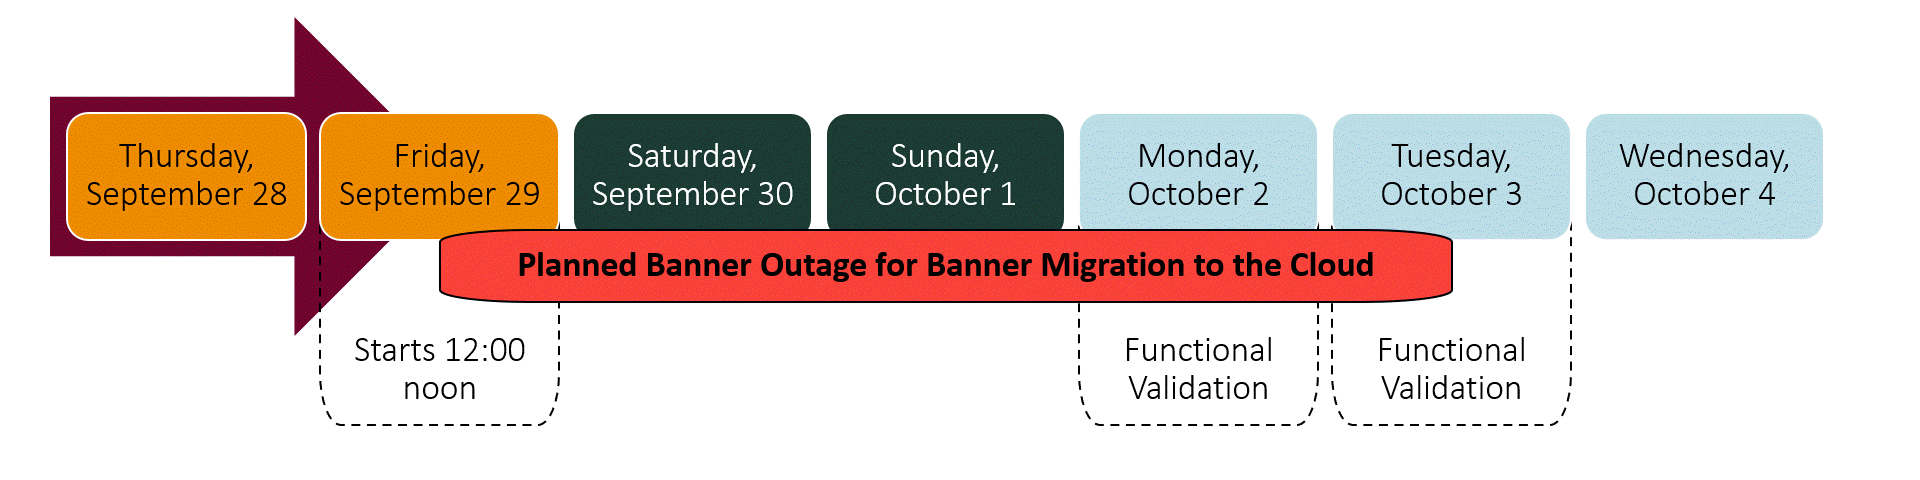 Visual of week schedule of Banner outage